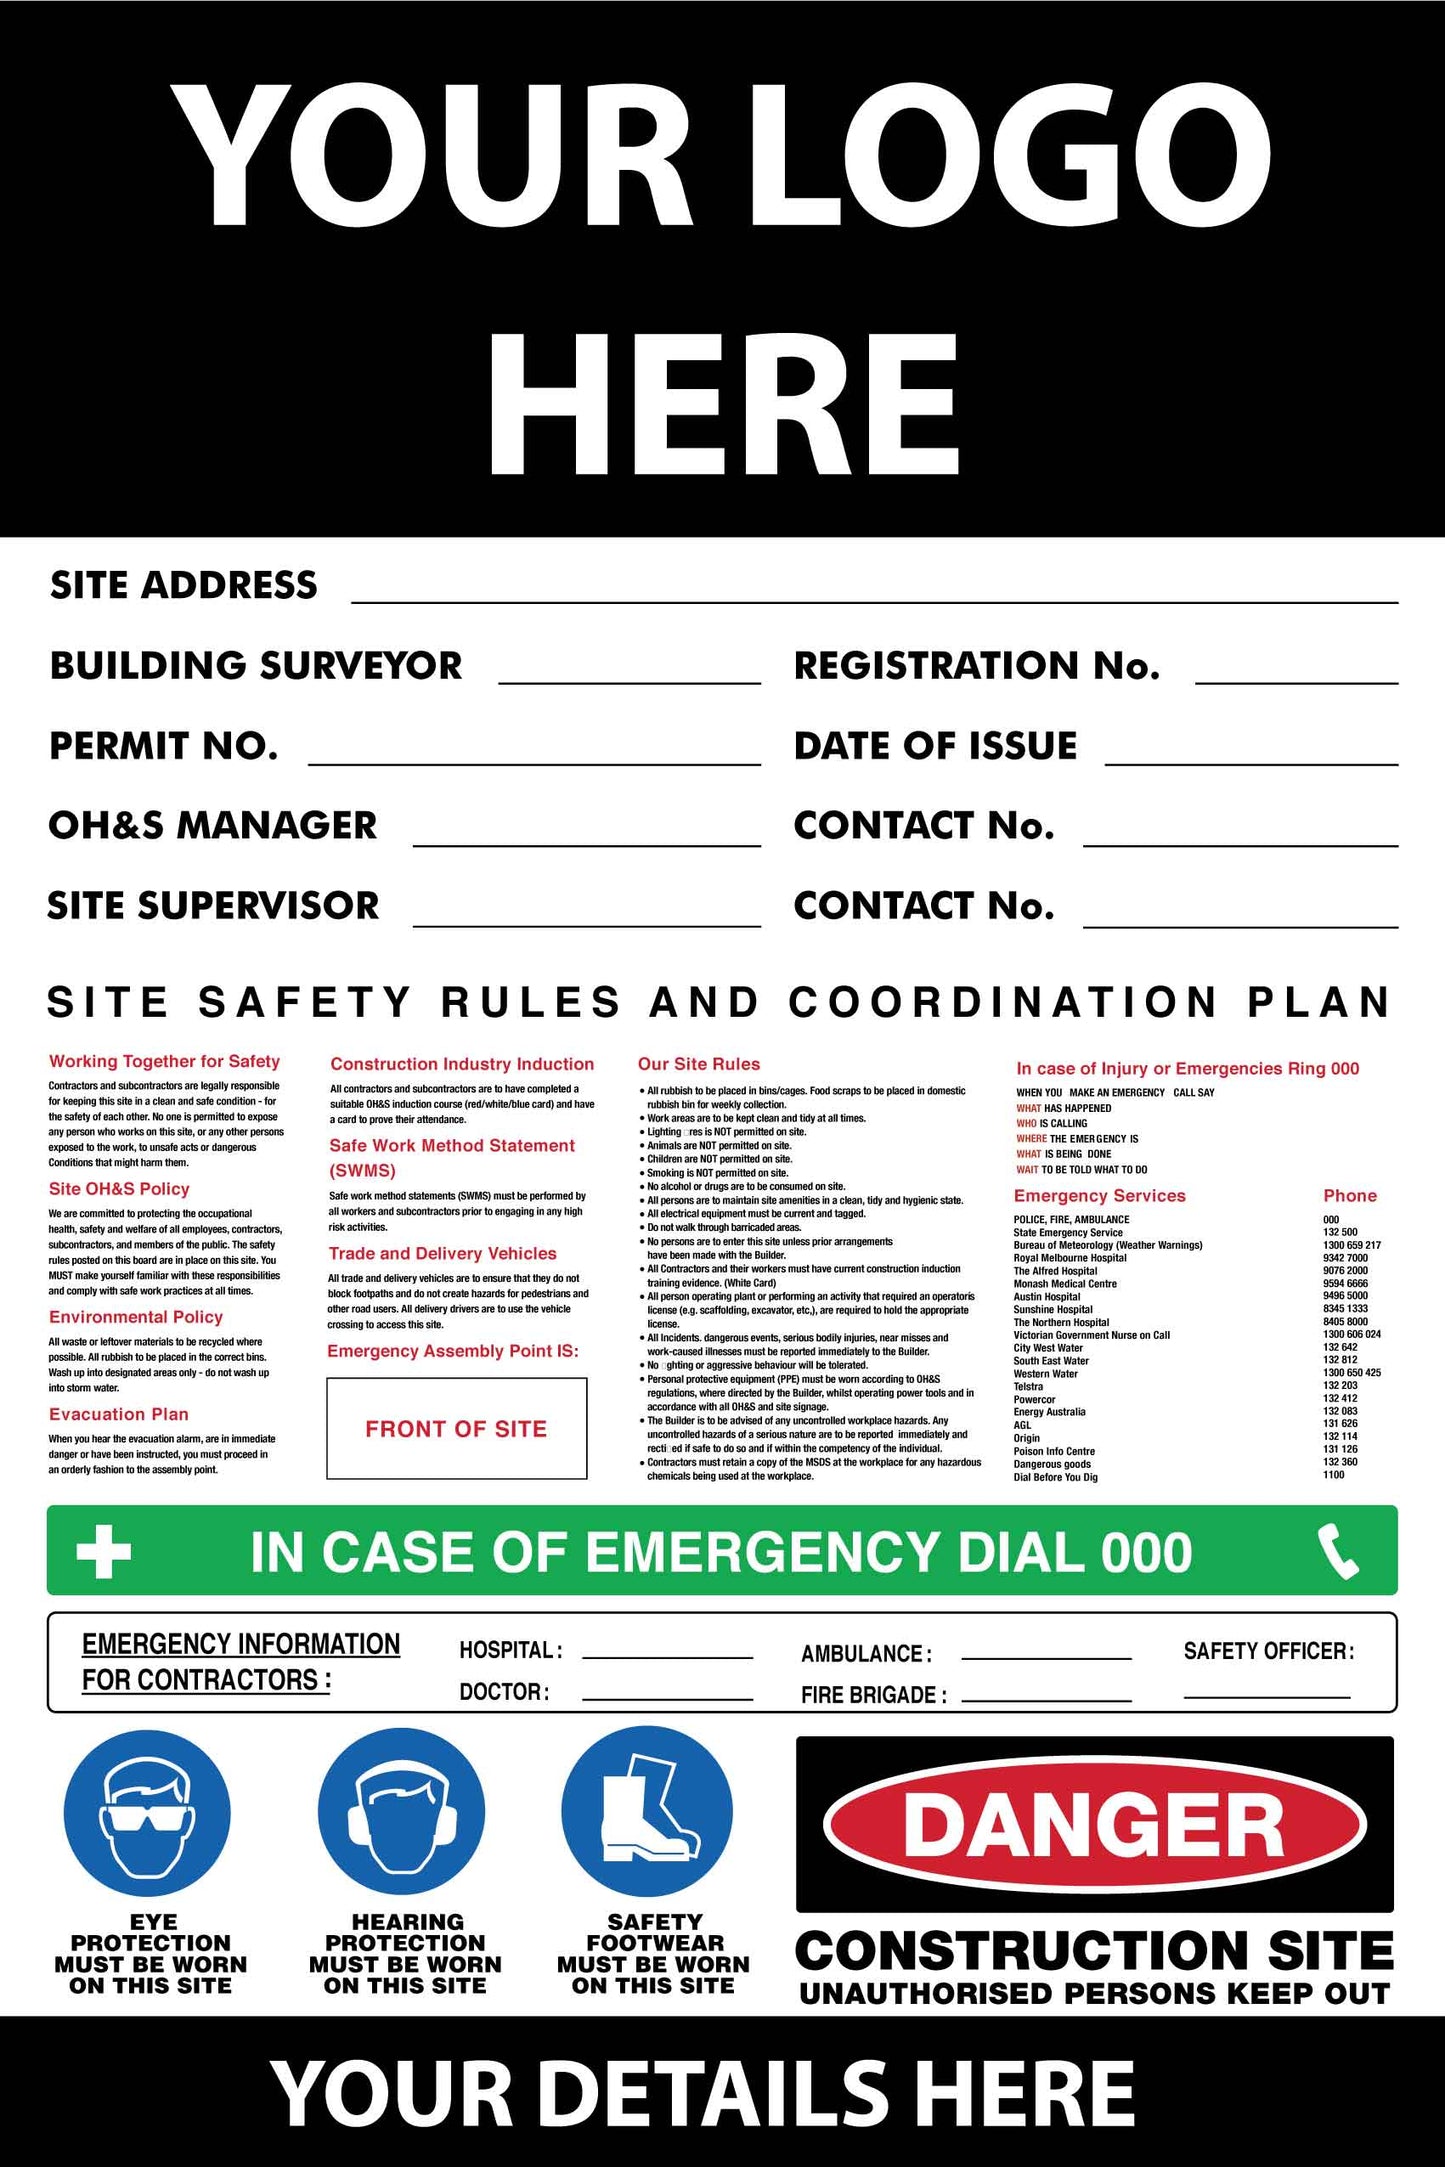 Construction Site Entry Safety Rules And Co-Ordination Plan Sign